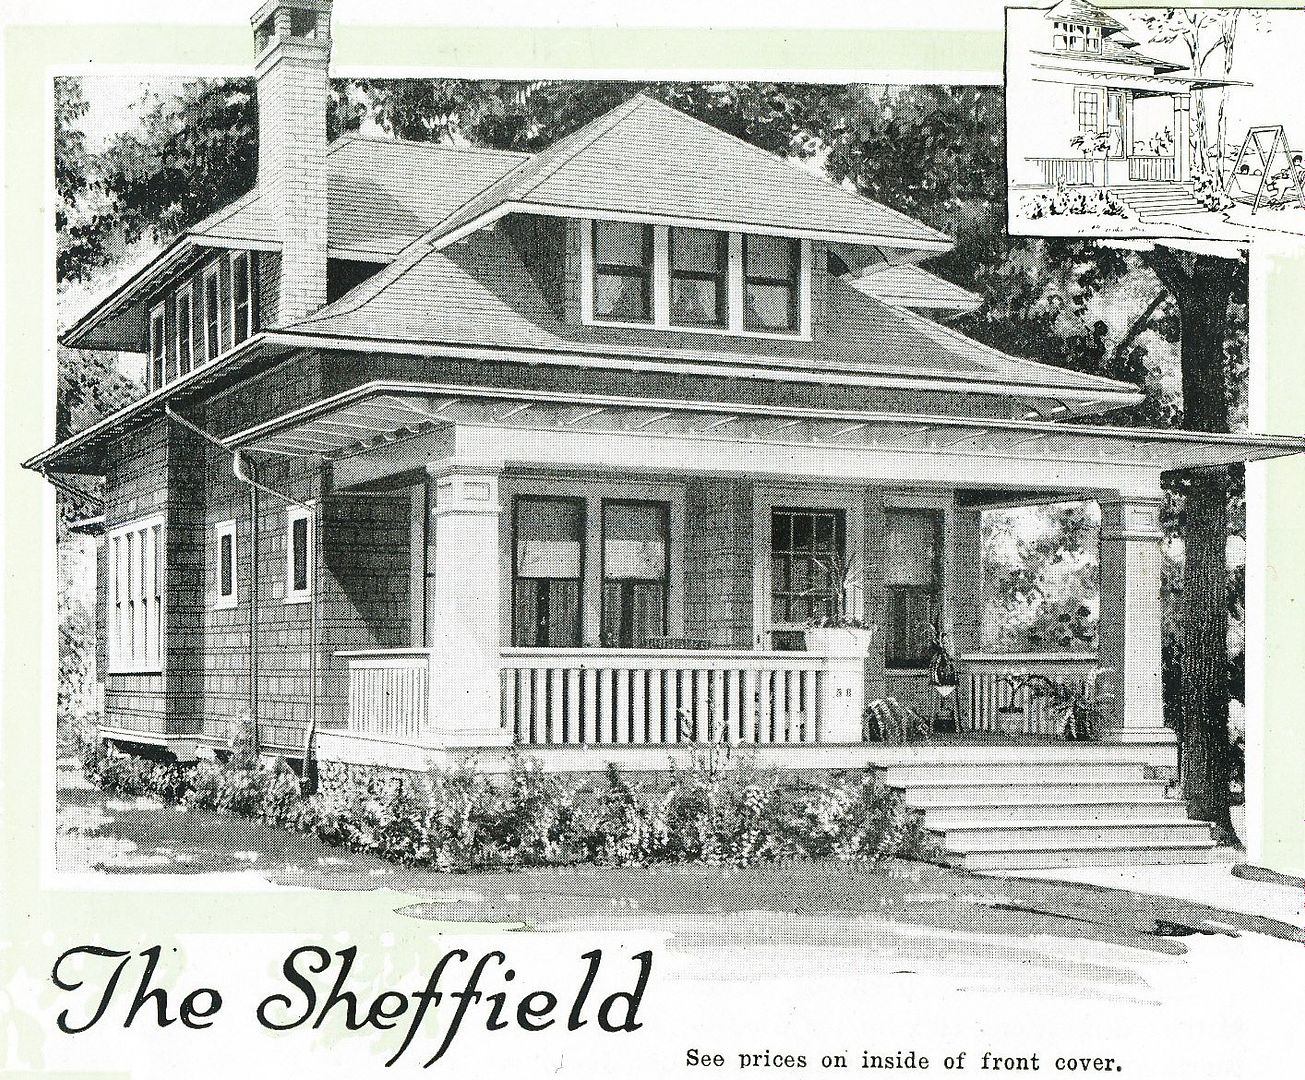 Aladdin Sheffield, as seen in the 1919 catalog